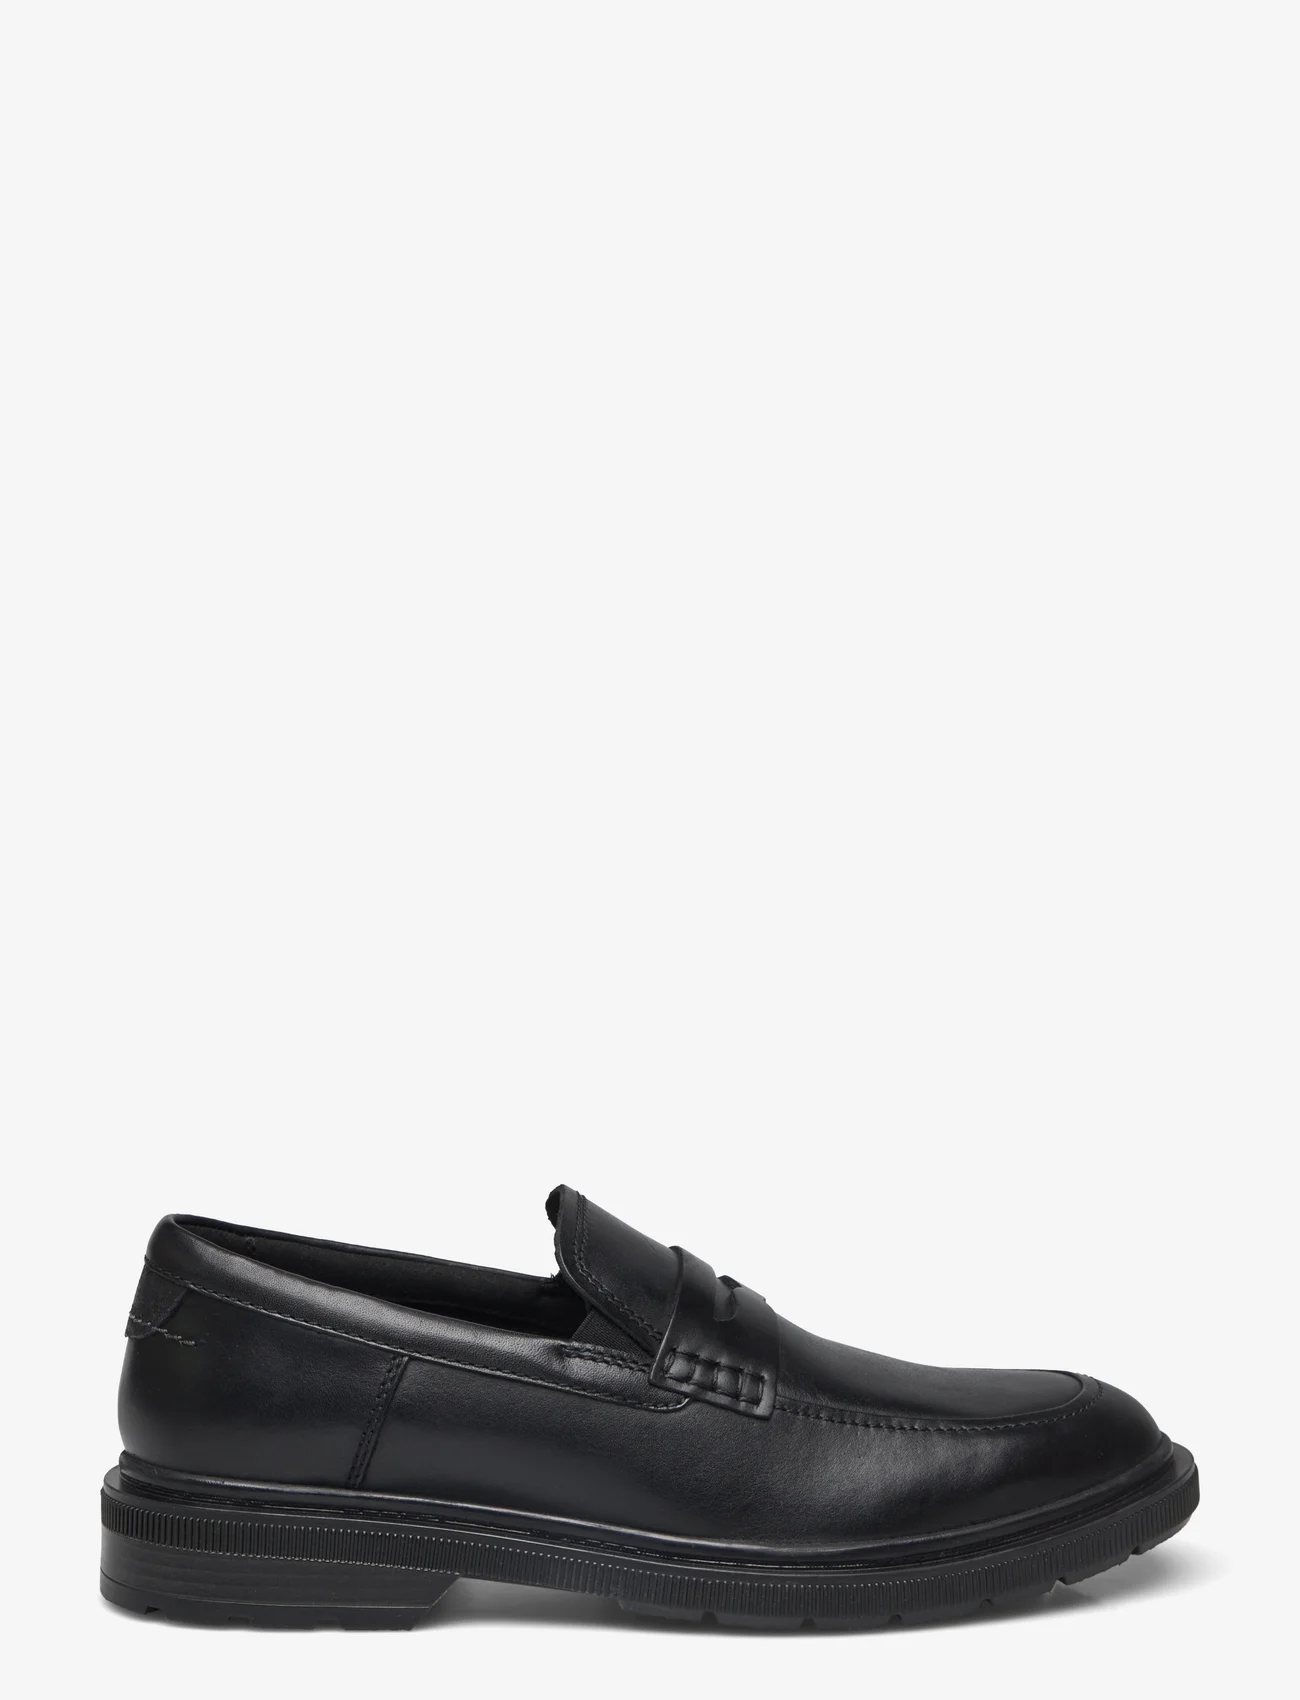 Clarks - Burchill Penny G - spring shoes - 1216 black leather - 1